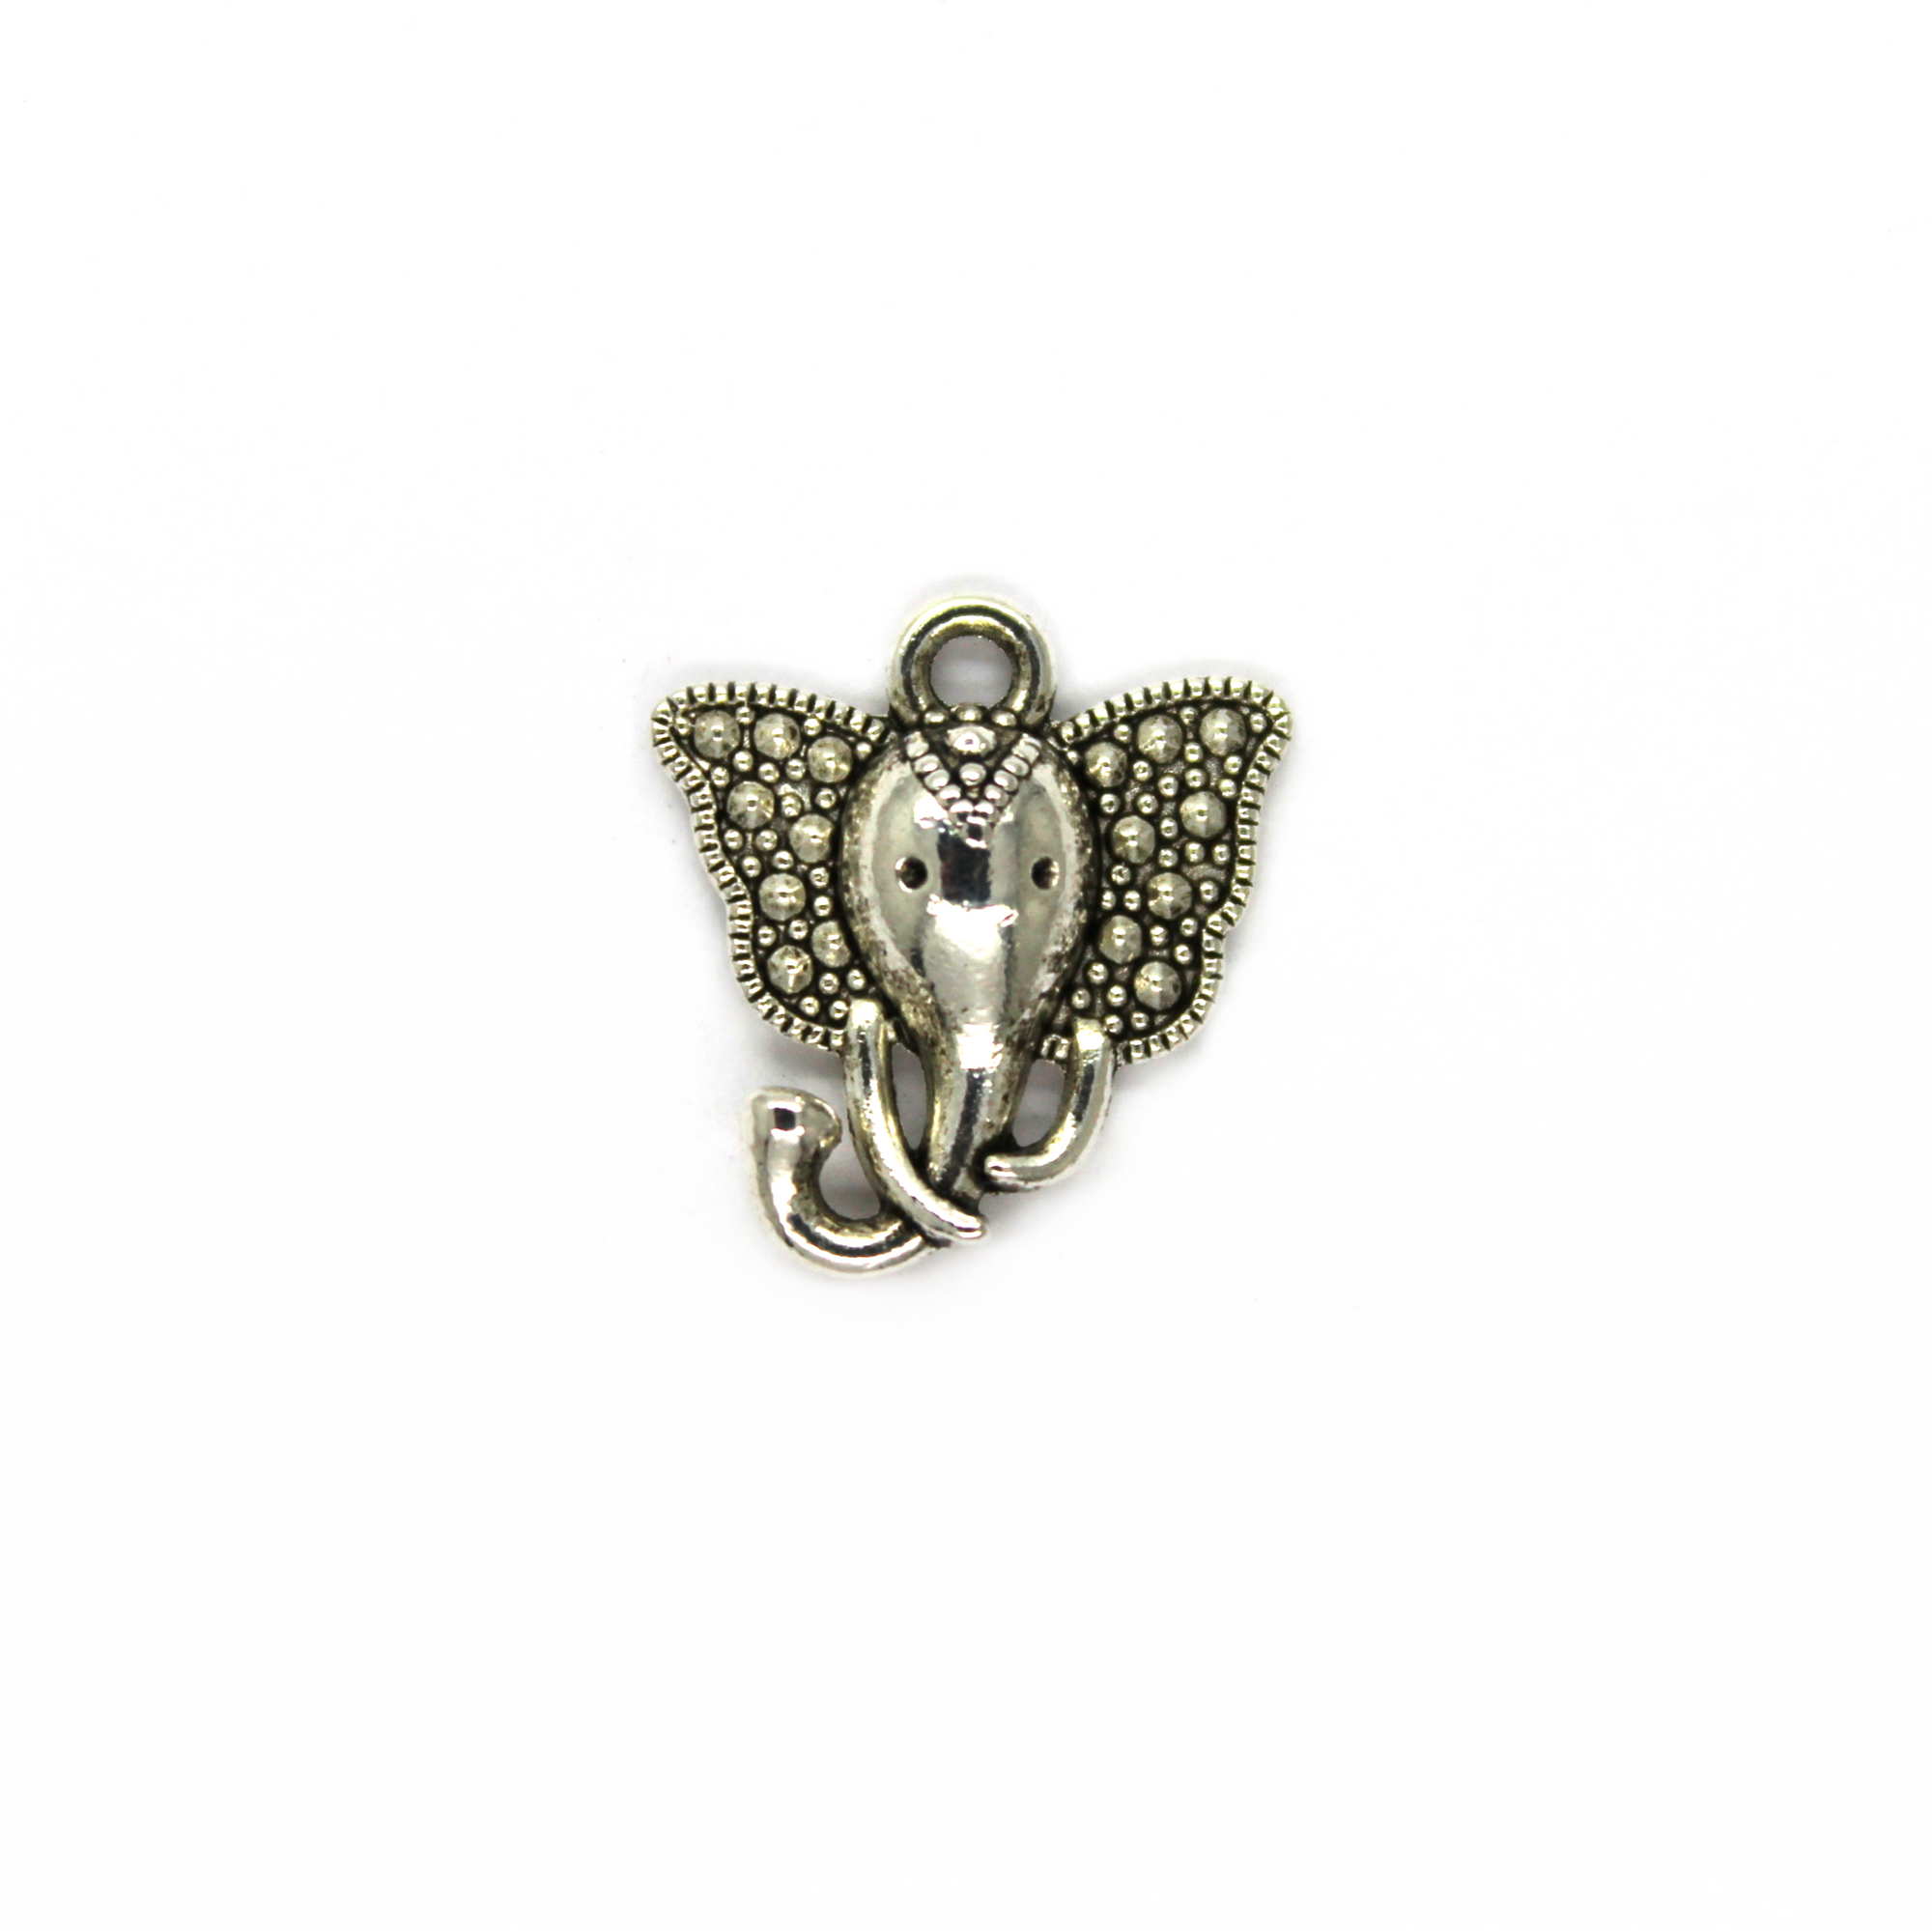 Charms, Elephant Head, Silver, Alloy, 16mm X 15mm, Sold Per pkg of 8